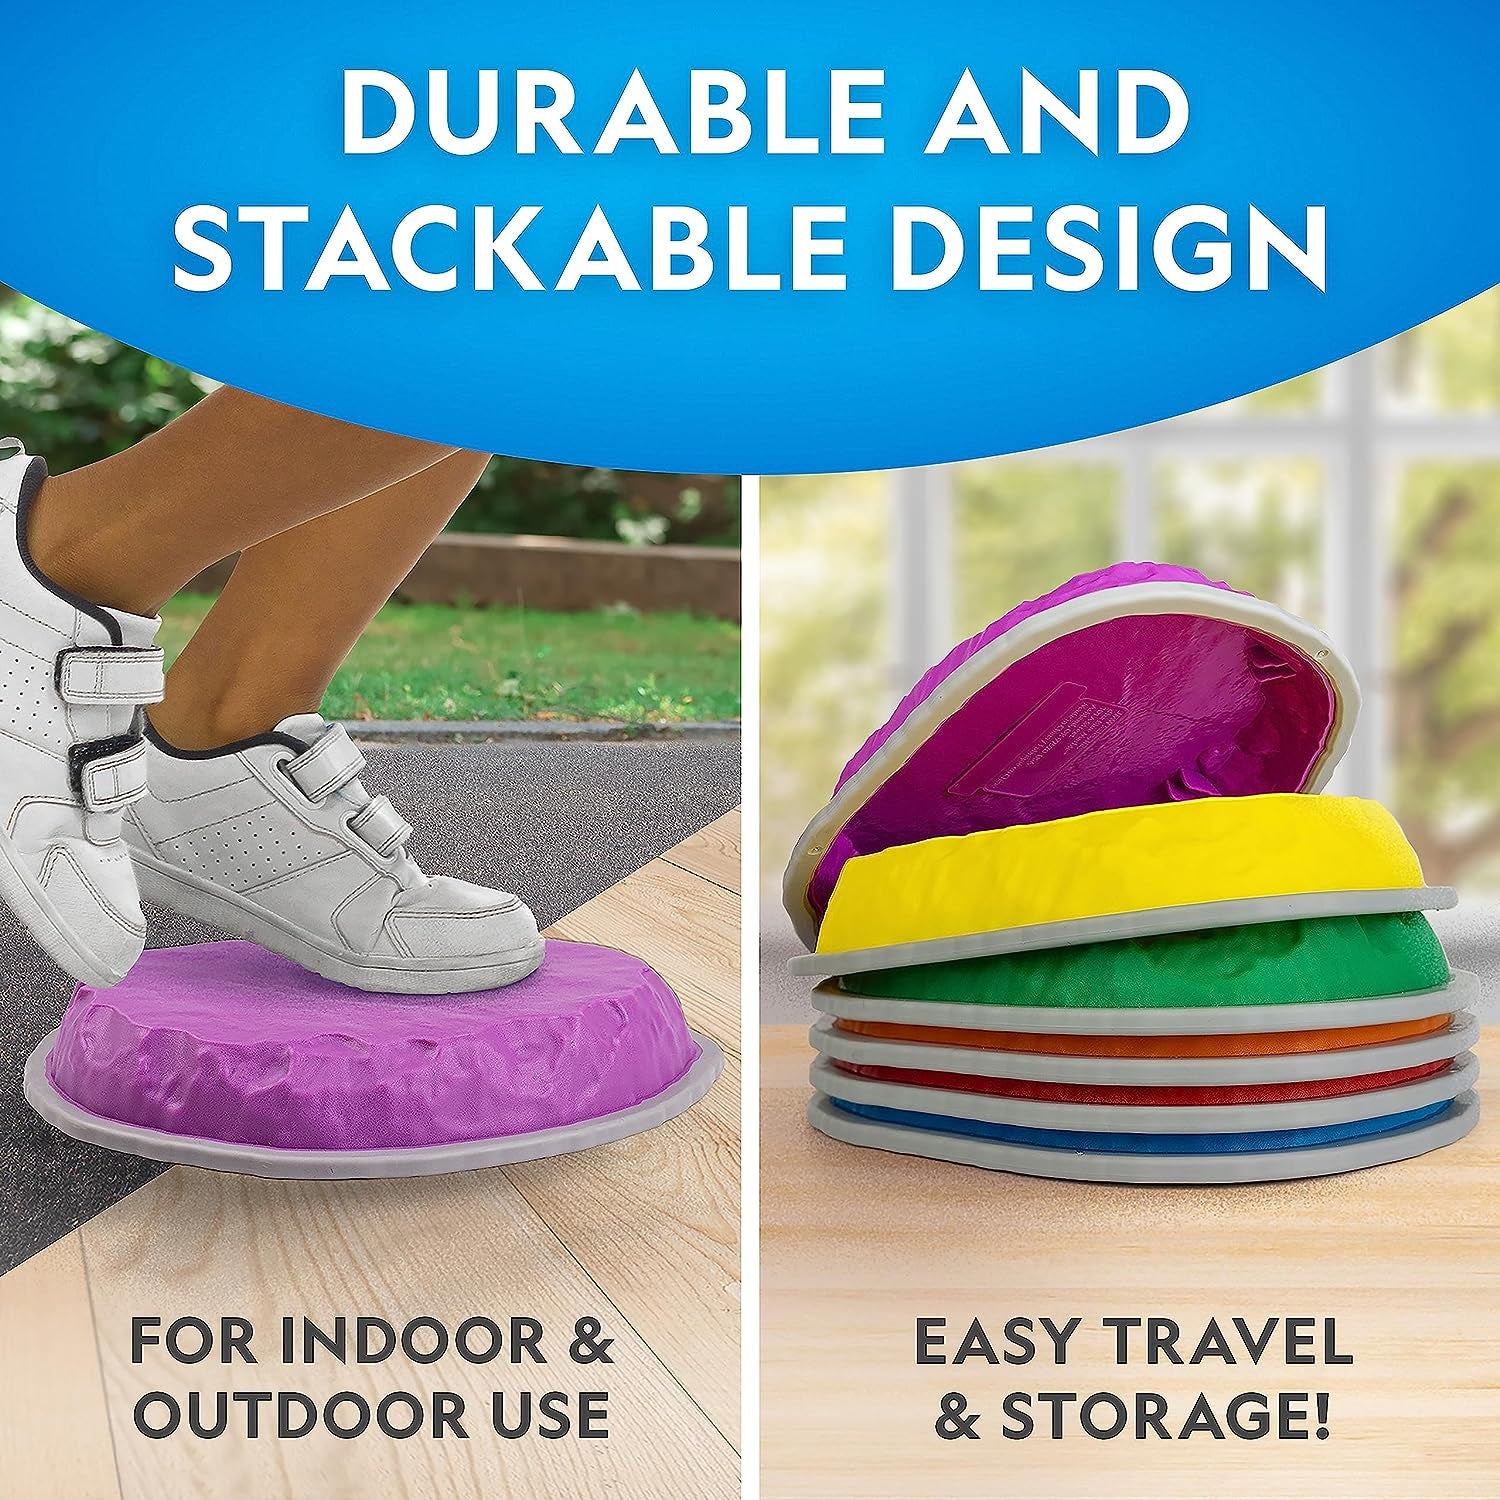 Stepping Stones for Kids – Durable Non-Slip Stones Encourage Toddler Balance & Gross Motor Skills, Indoor & Outdoor Toys, Balance Stones, Obstacle Course (Amazon Exclusive)